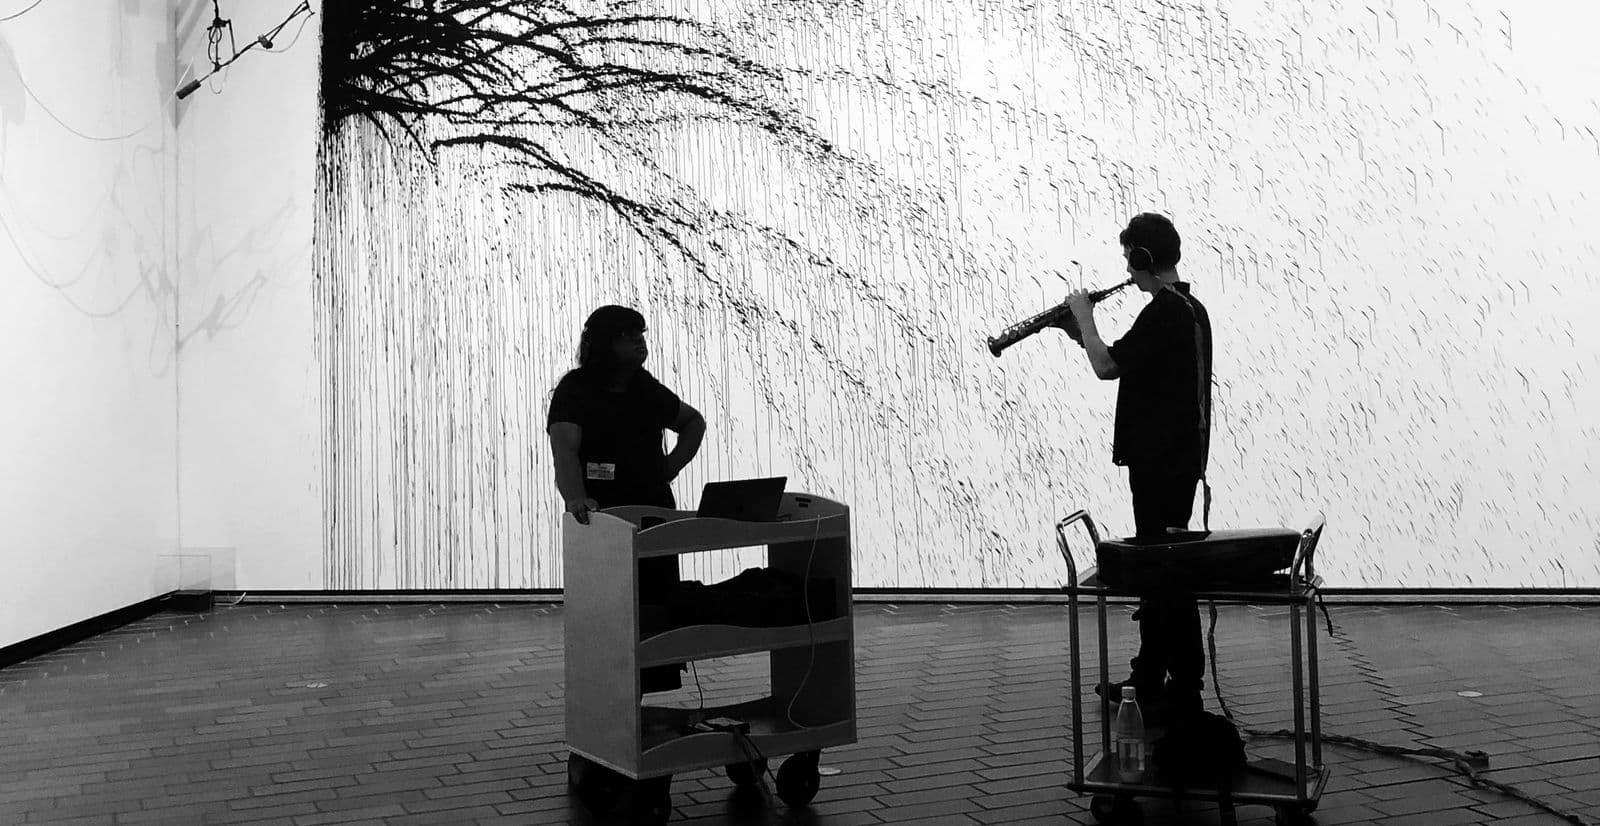 Sound artist Sia Ahmad and musician Tom Fell capturing the sound of the a saxaphone being played at the National Gallery